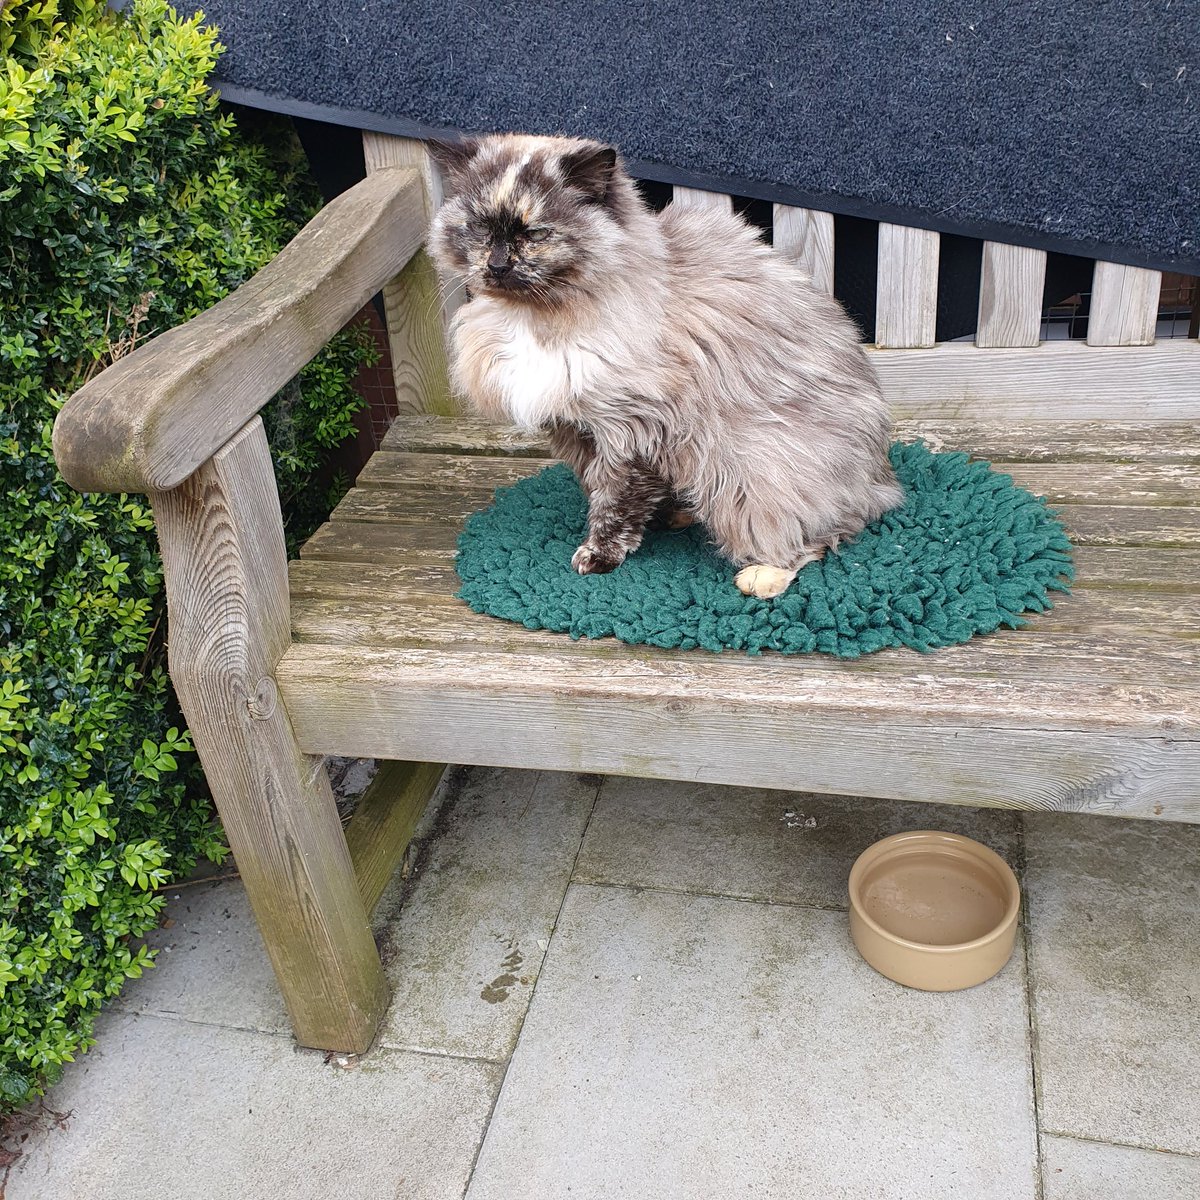 #ThursdayThoughts ~ Tula is sitting looking very serious outside the rehoming pens. Has she had her sleep disturbed by the volunteers cleaning? #inthecompanyofcats #seniorcats #catrescue #CatsOnTwitter #cats